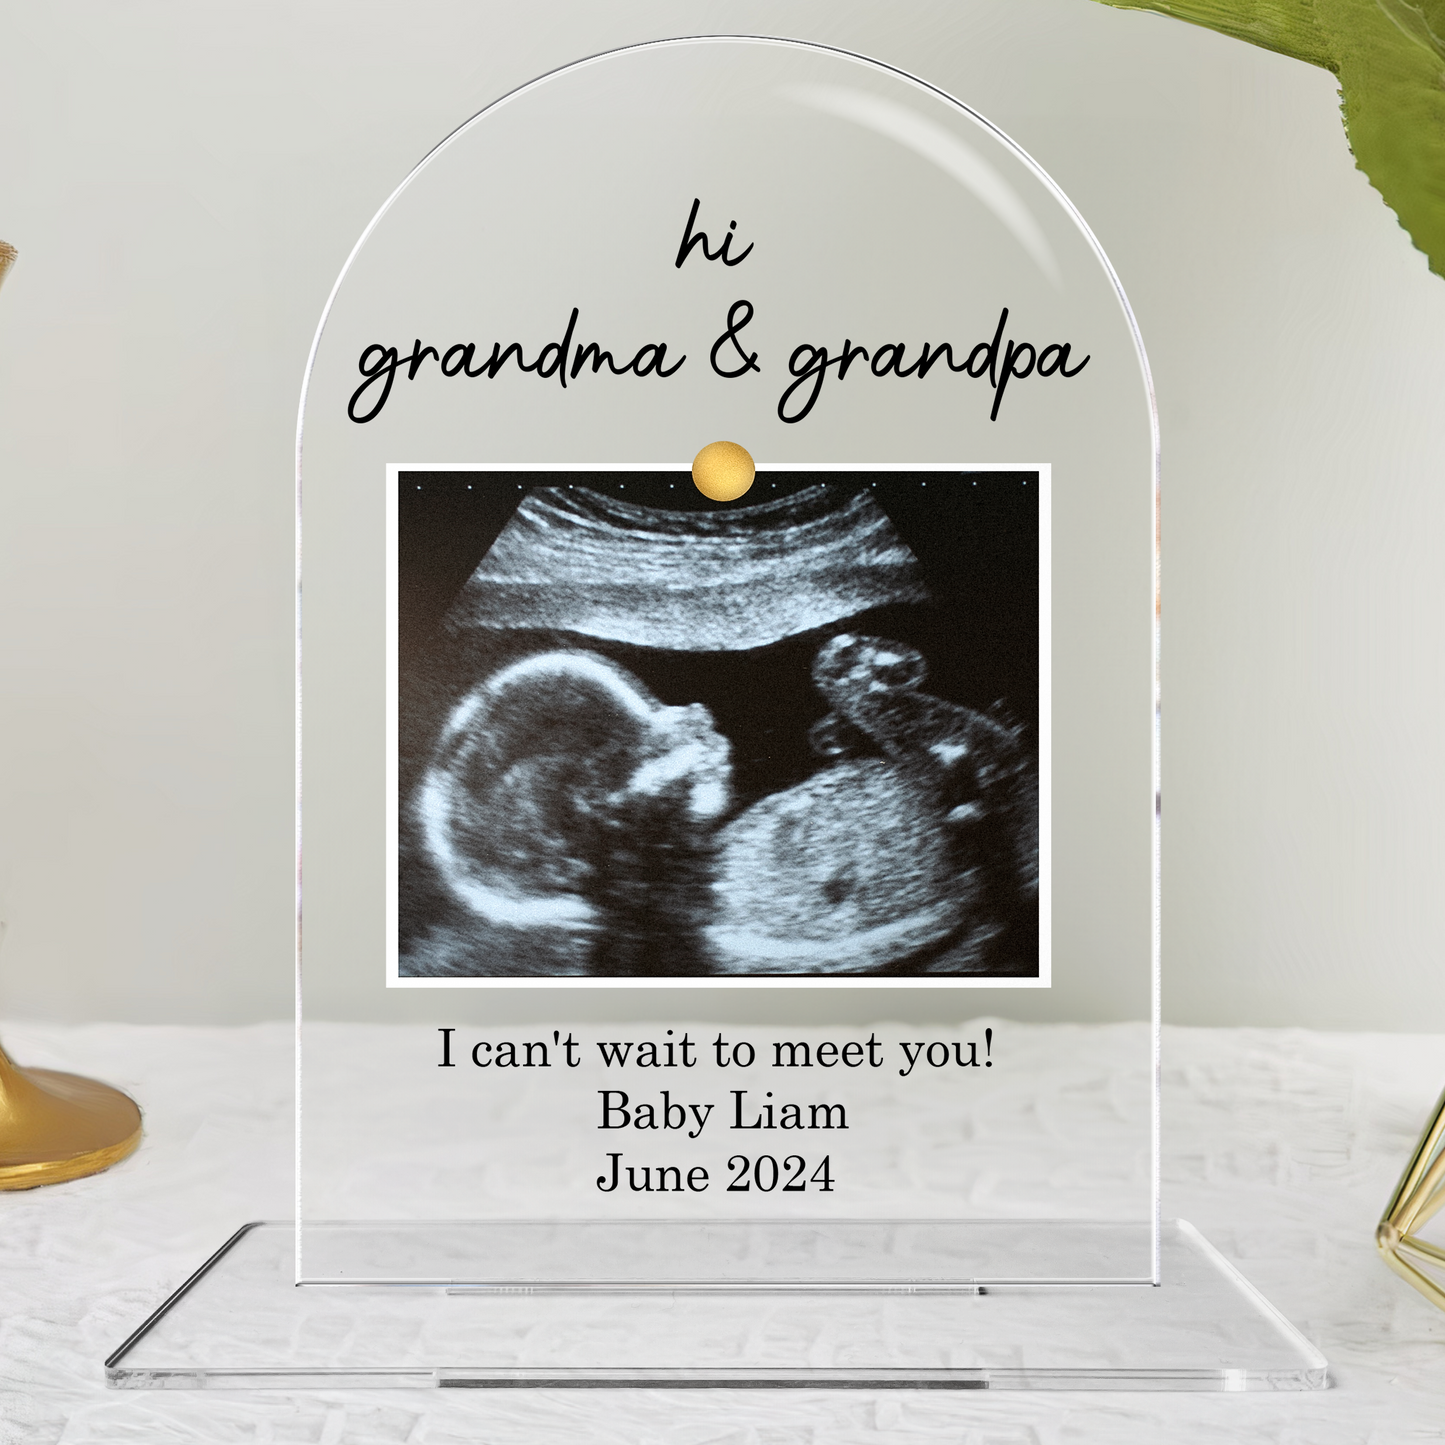 Hi Grandma And Grandpa I Can't Wait To Meet You - Personalized Acrylic Photo Plaque